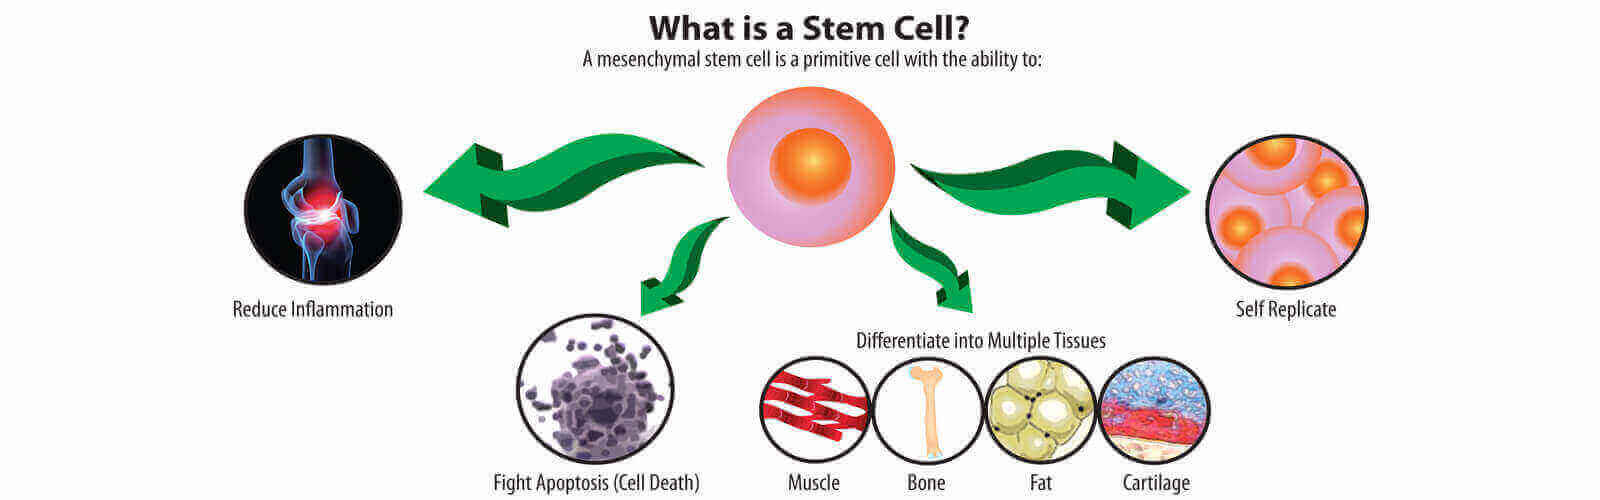 Stem Cell Treatment in Uruguay